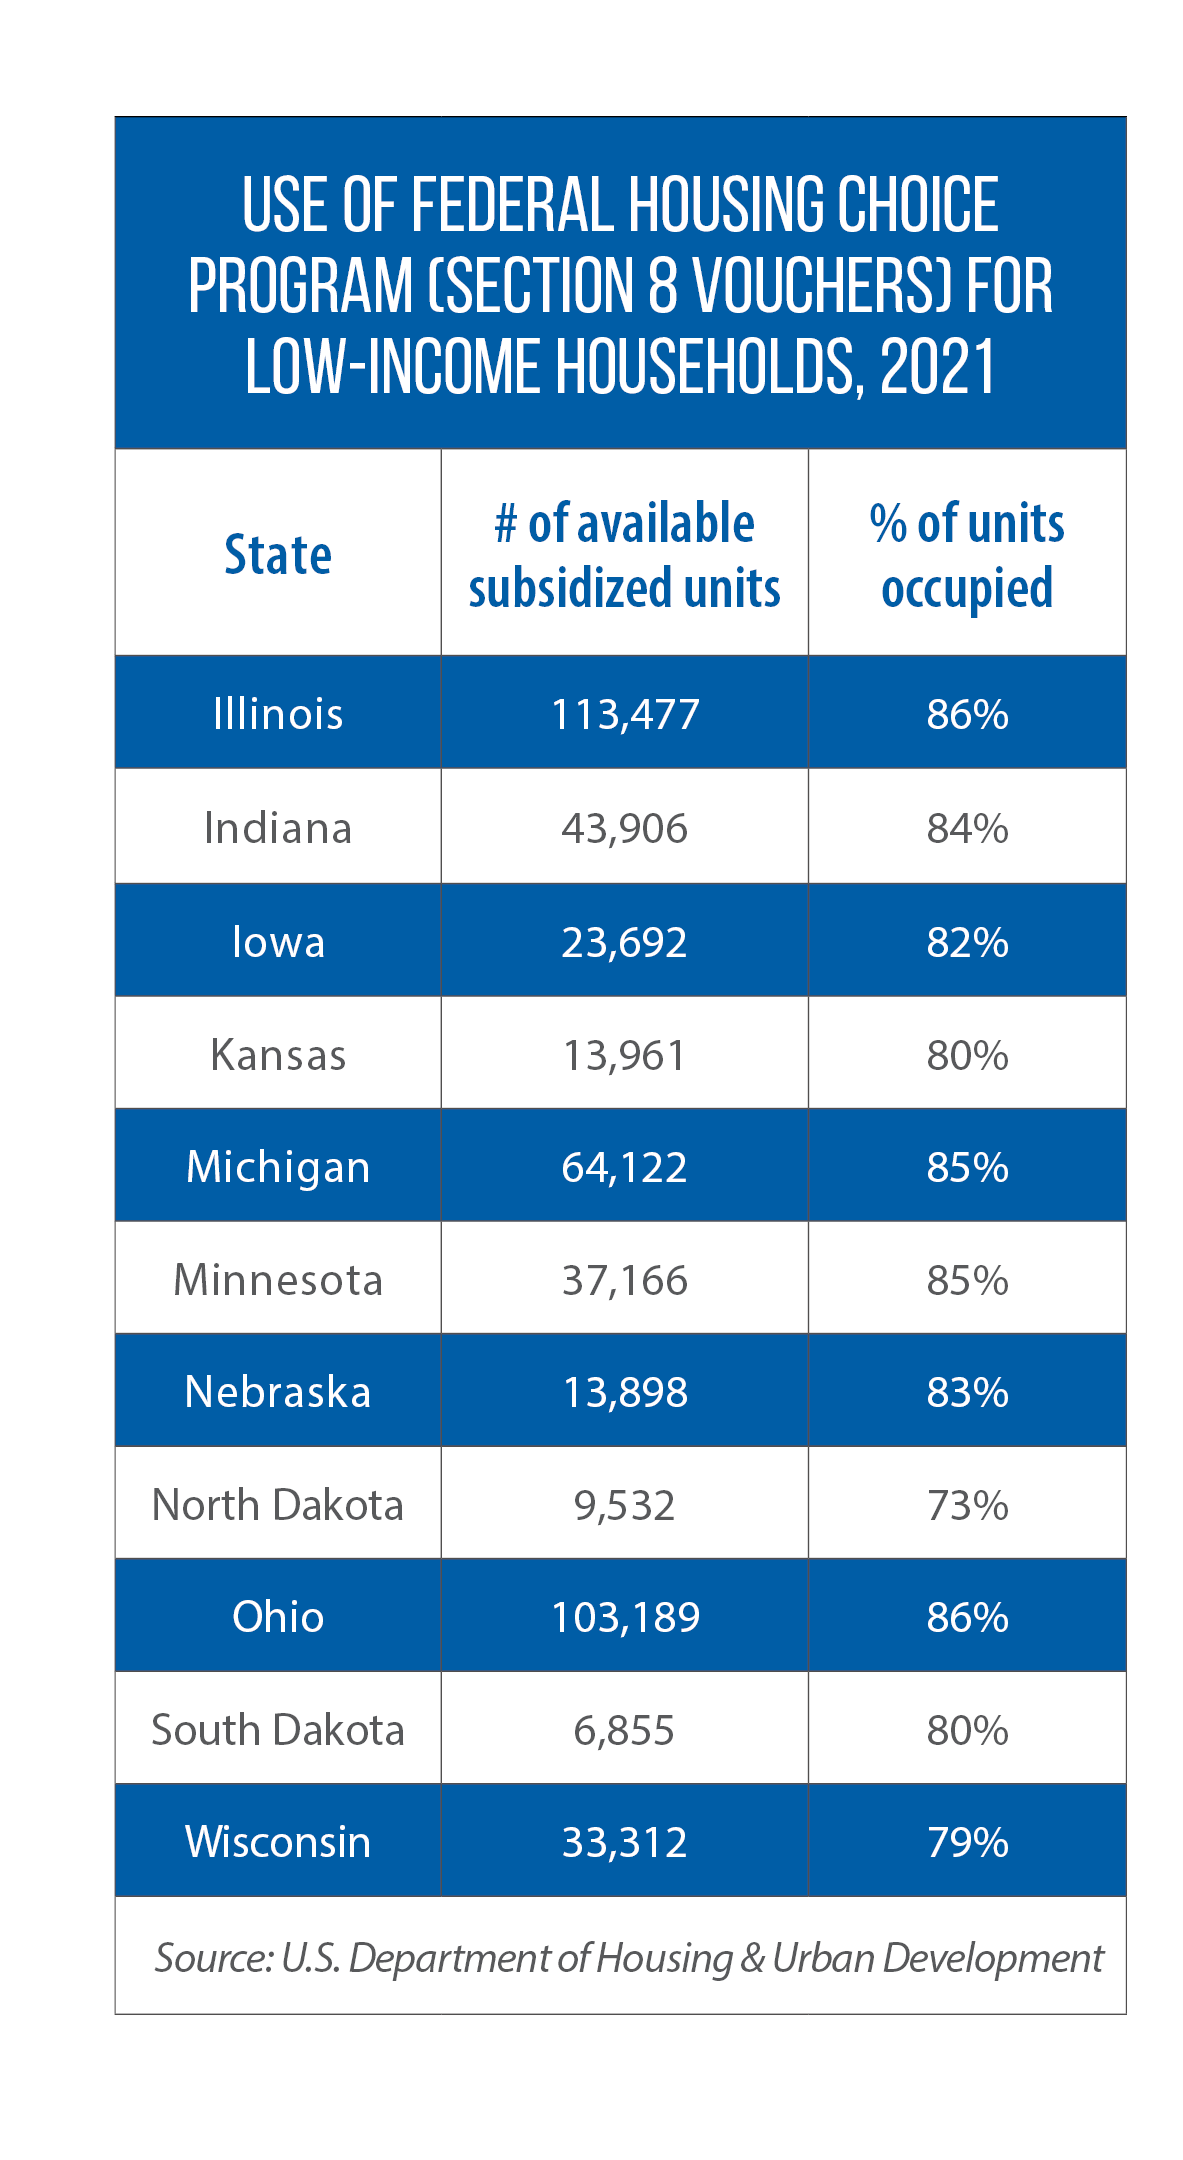 Table showing use of Section 8 vouchers in Midwestern states in 2021